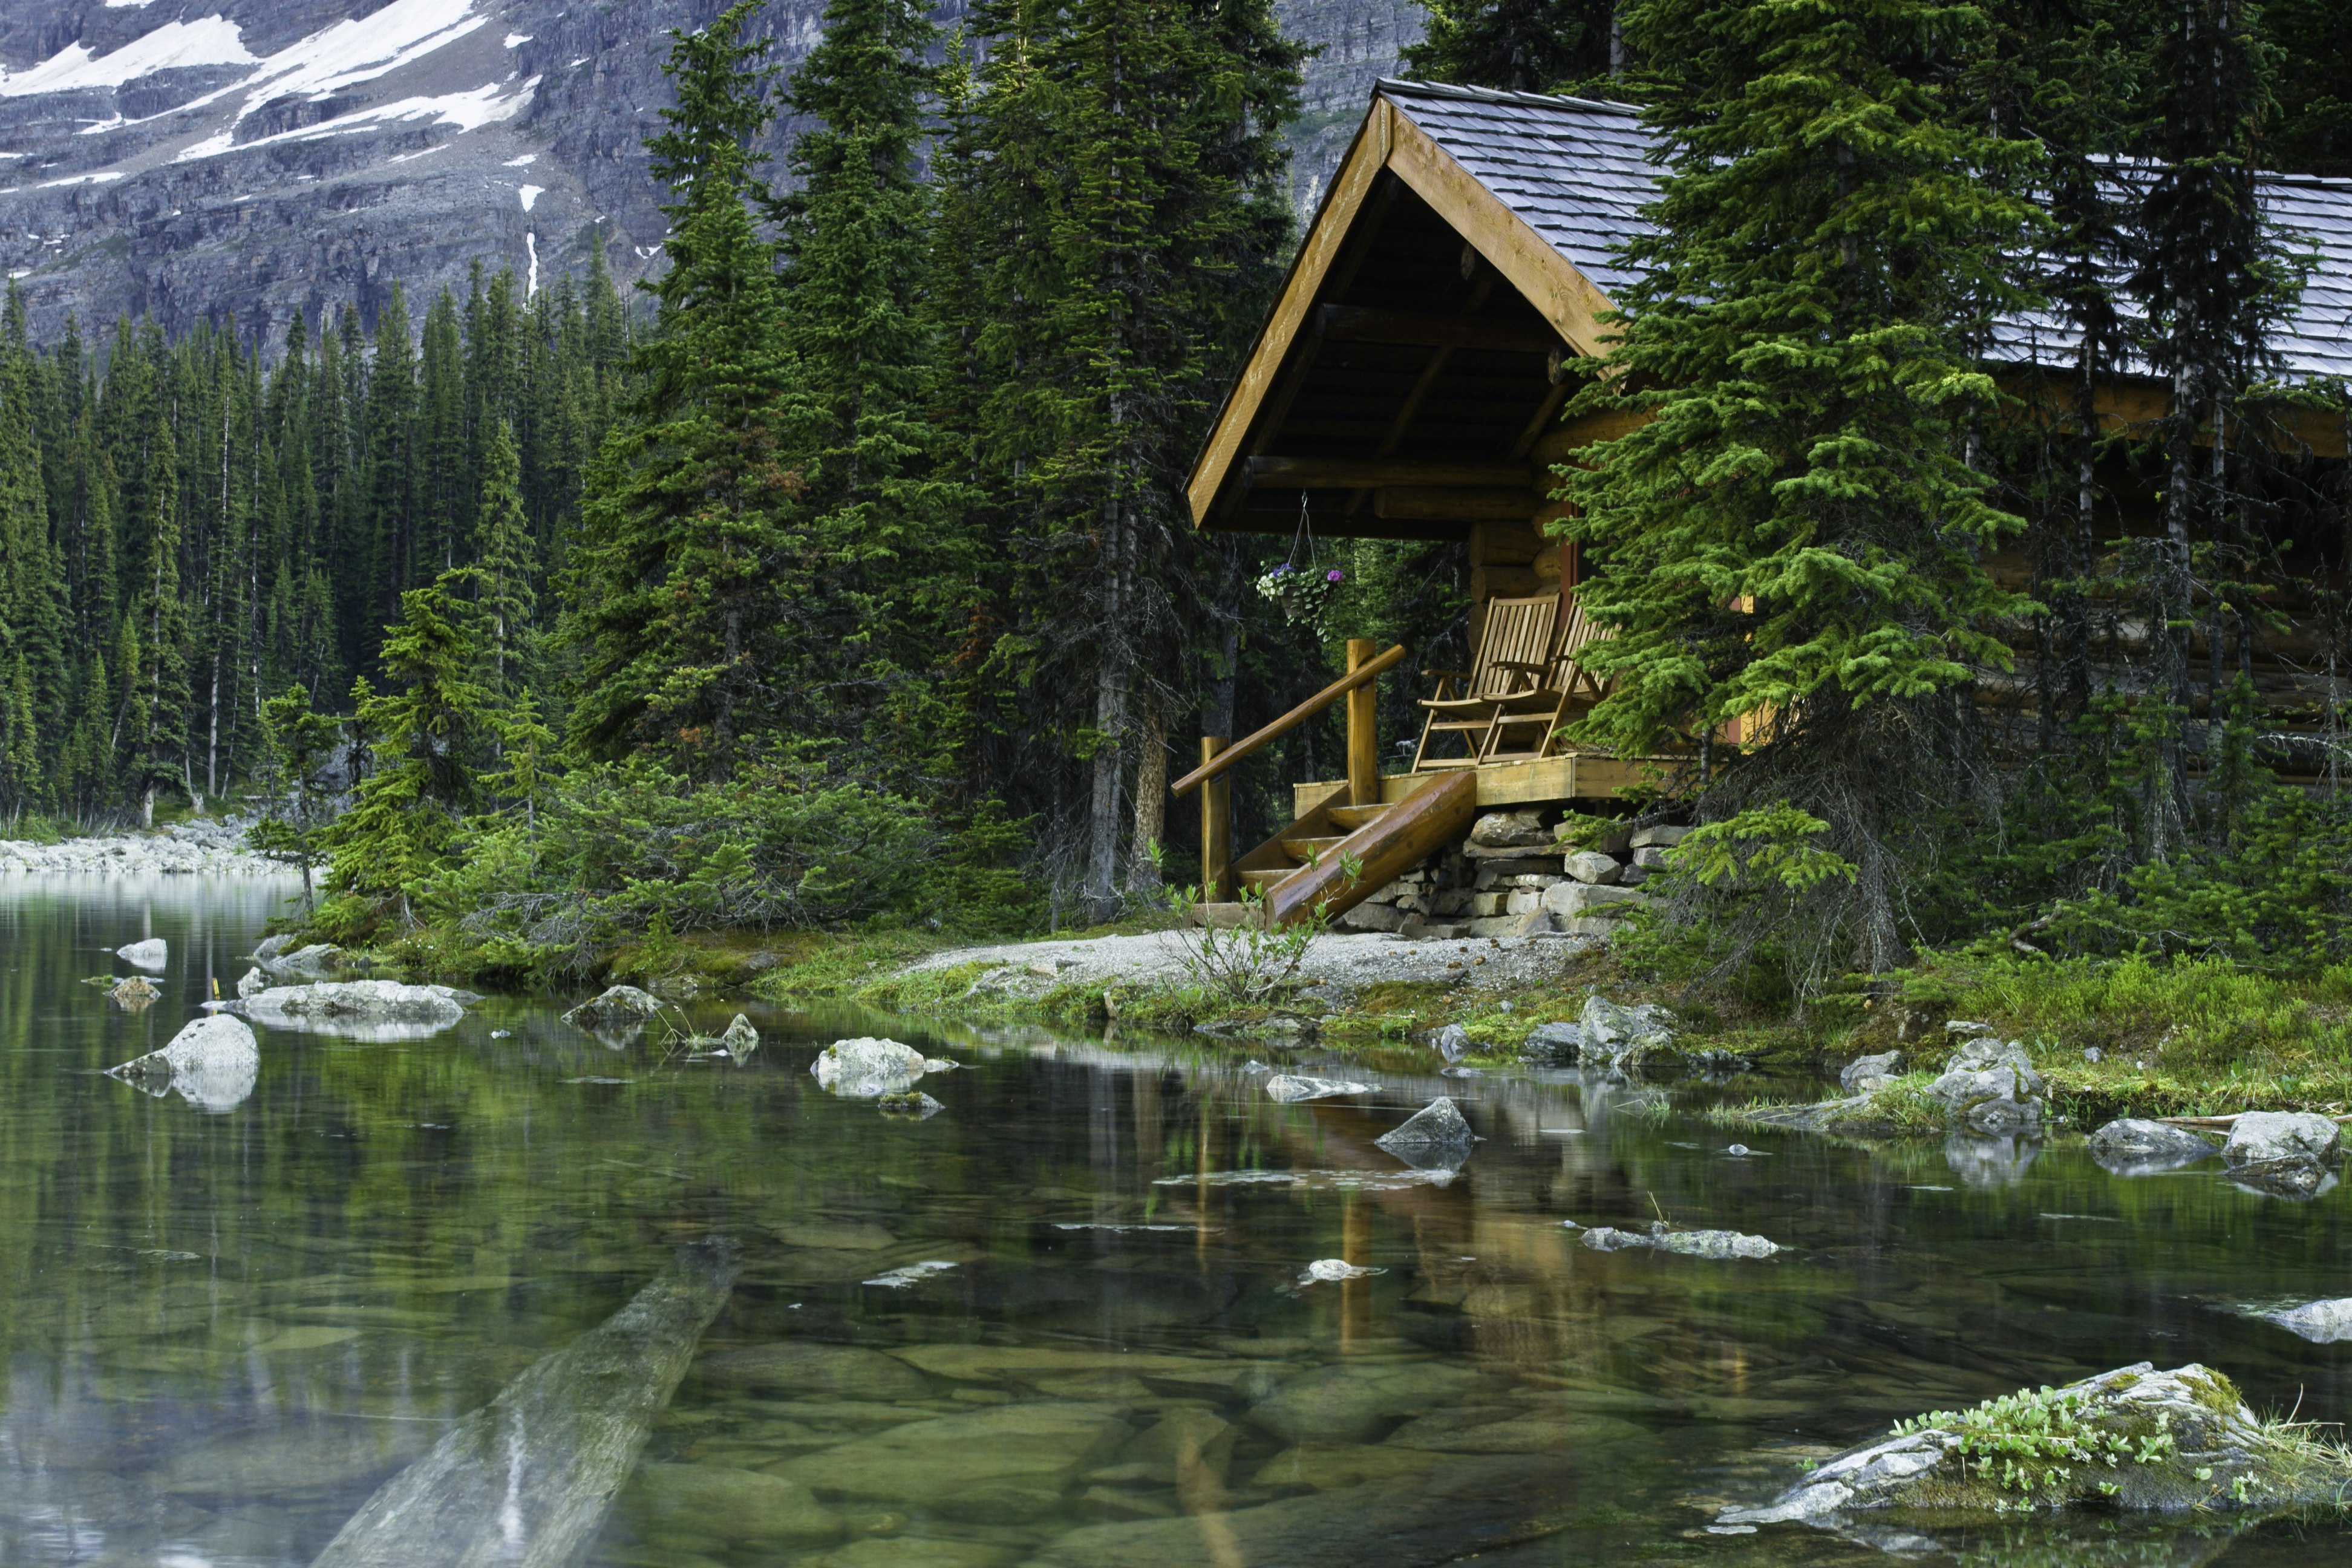 A log cabin set within evergreen trees on the rocky shore of a peaceful lake.